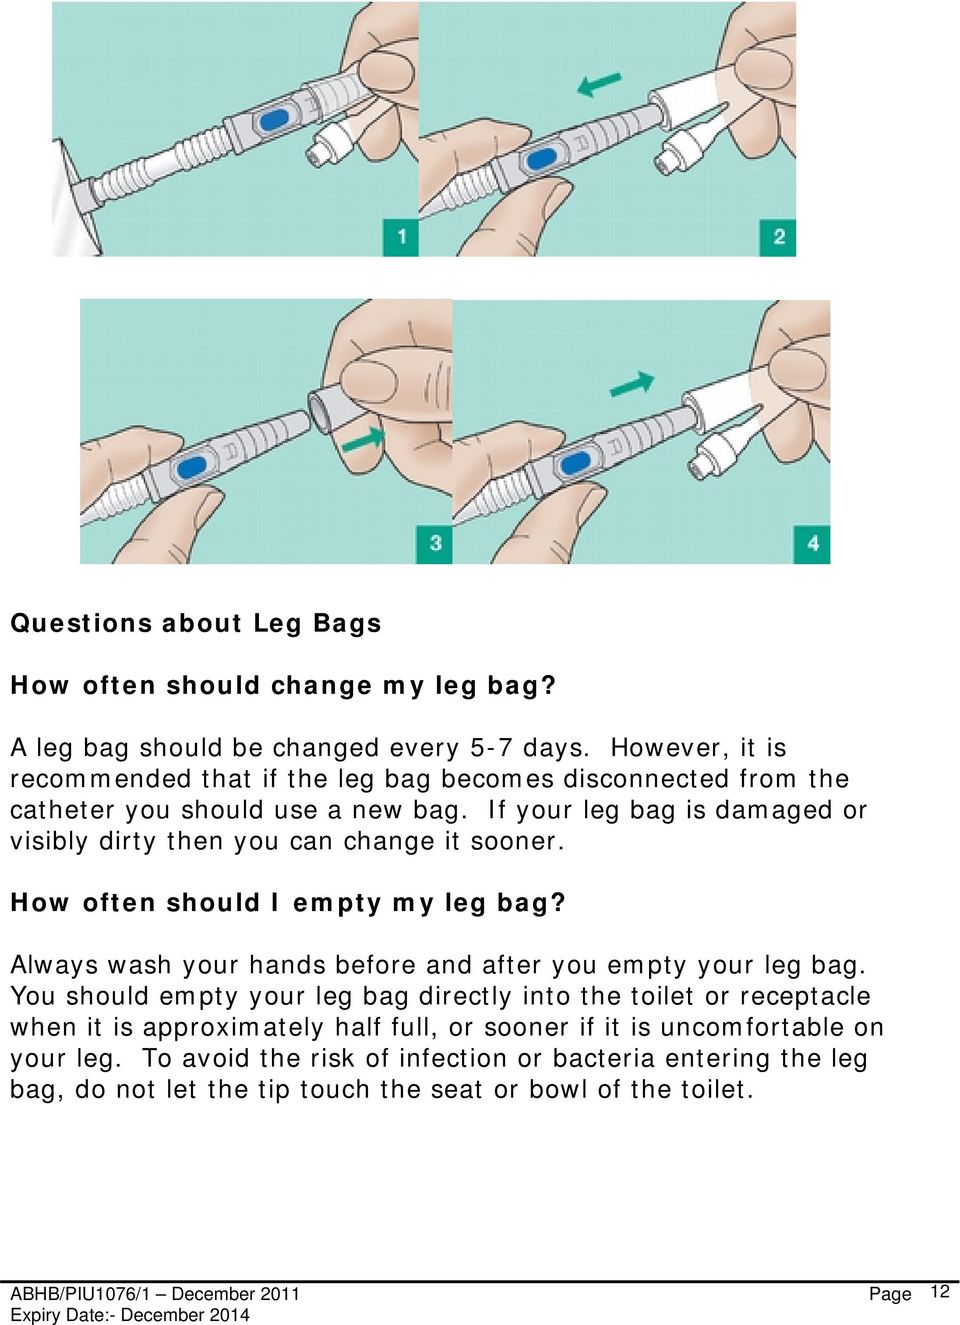 If your leg bag is damaged or visibly dirty then you can change it sooner. How often should I empty my leg bag?